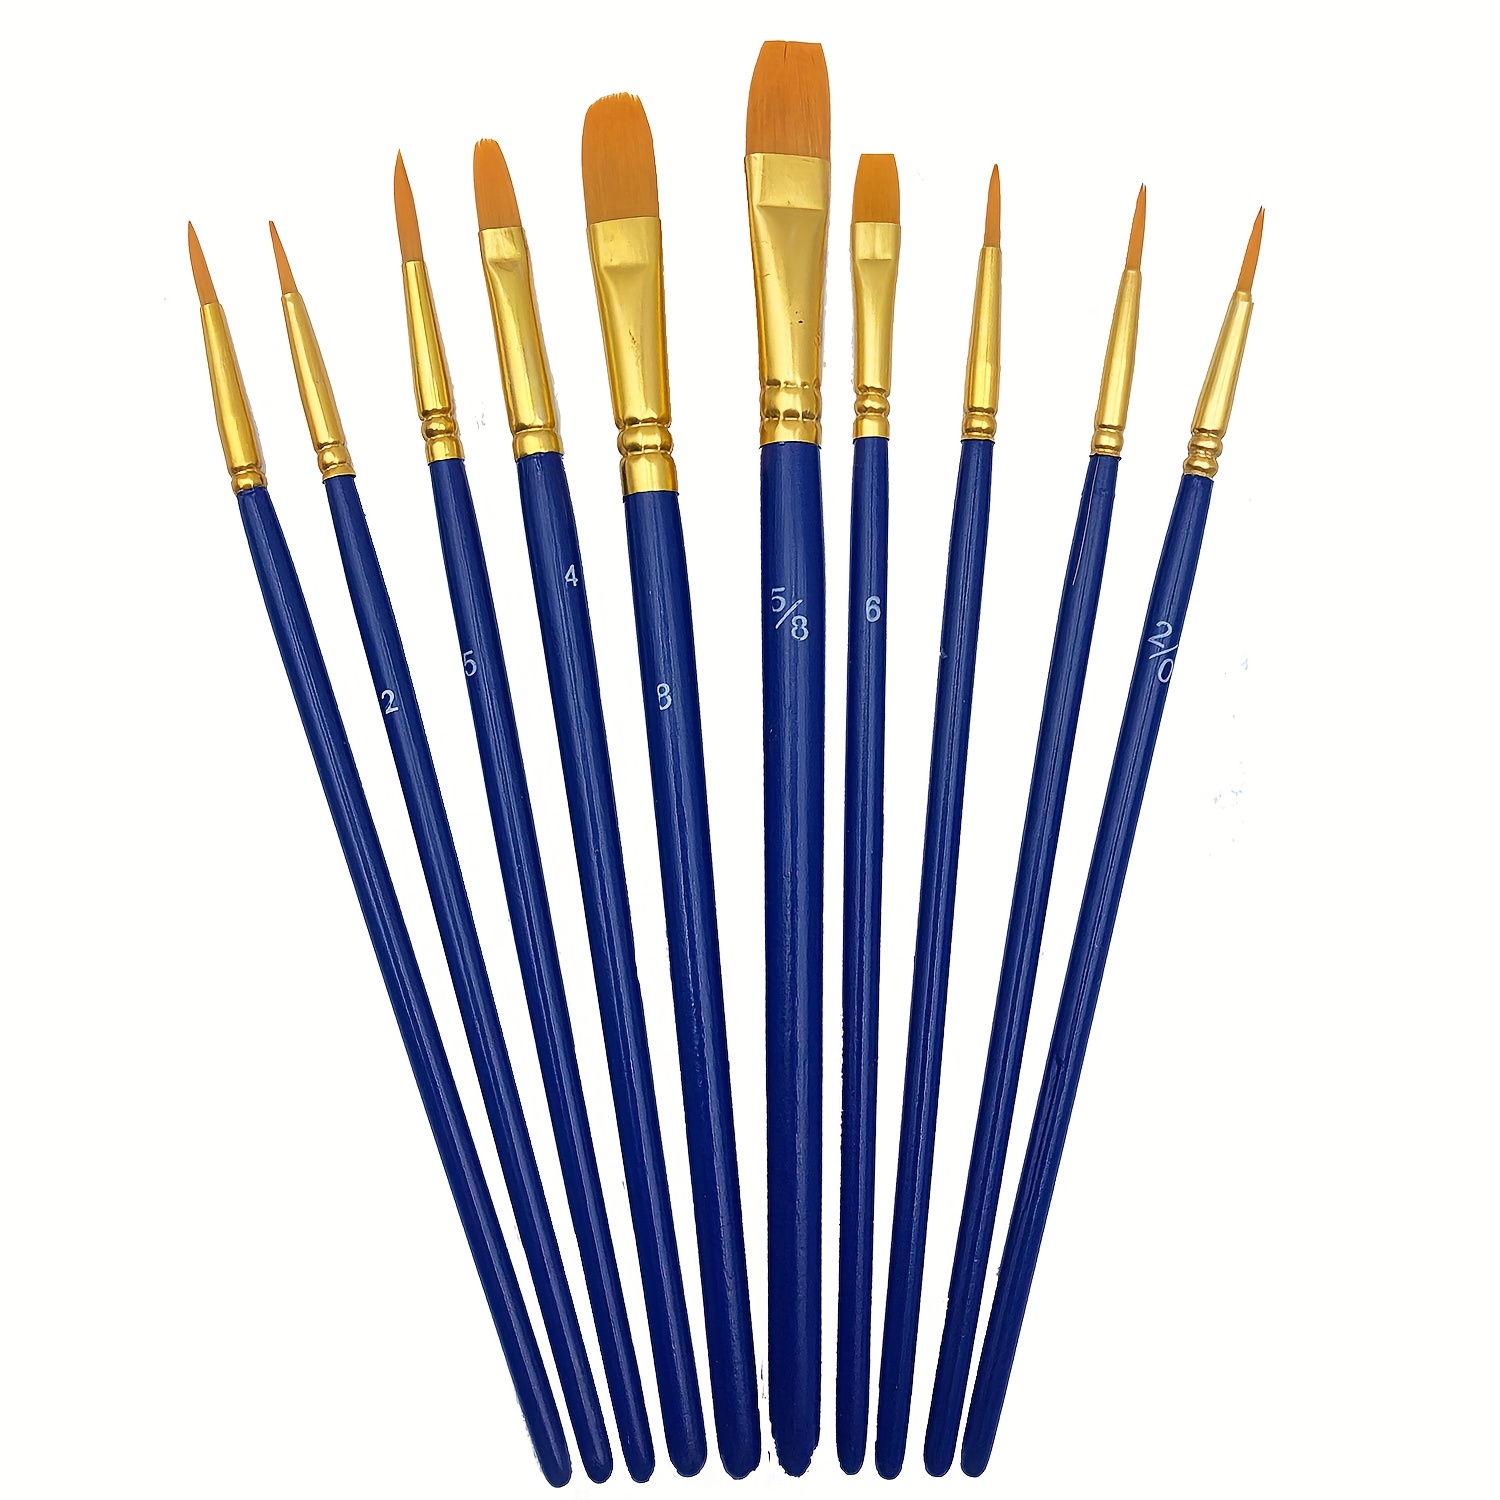 20 Pcs 1 Inch Flat Paint Brush Nylon Craft Brushes with Wooden Handle for  Acrylic Watercolor Oil Crafts Face Body Art